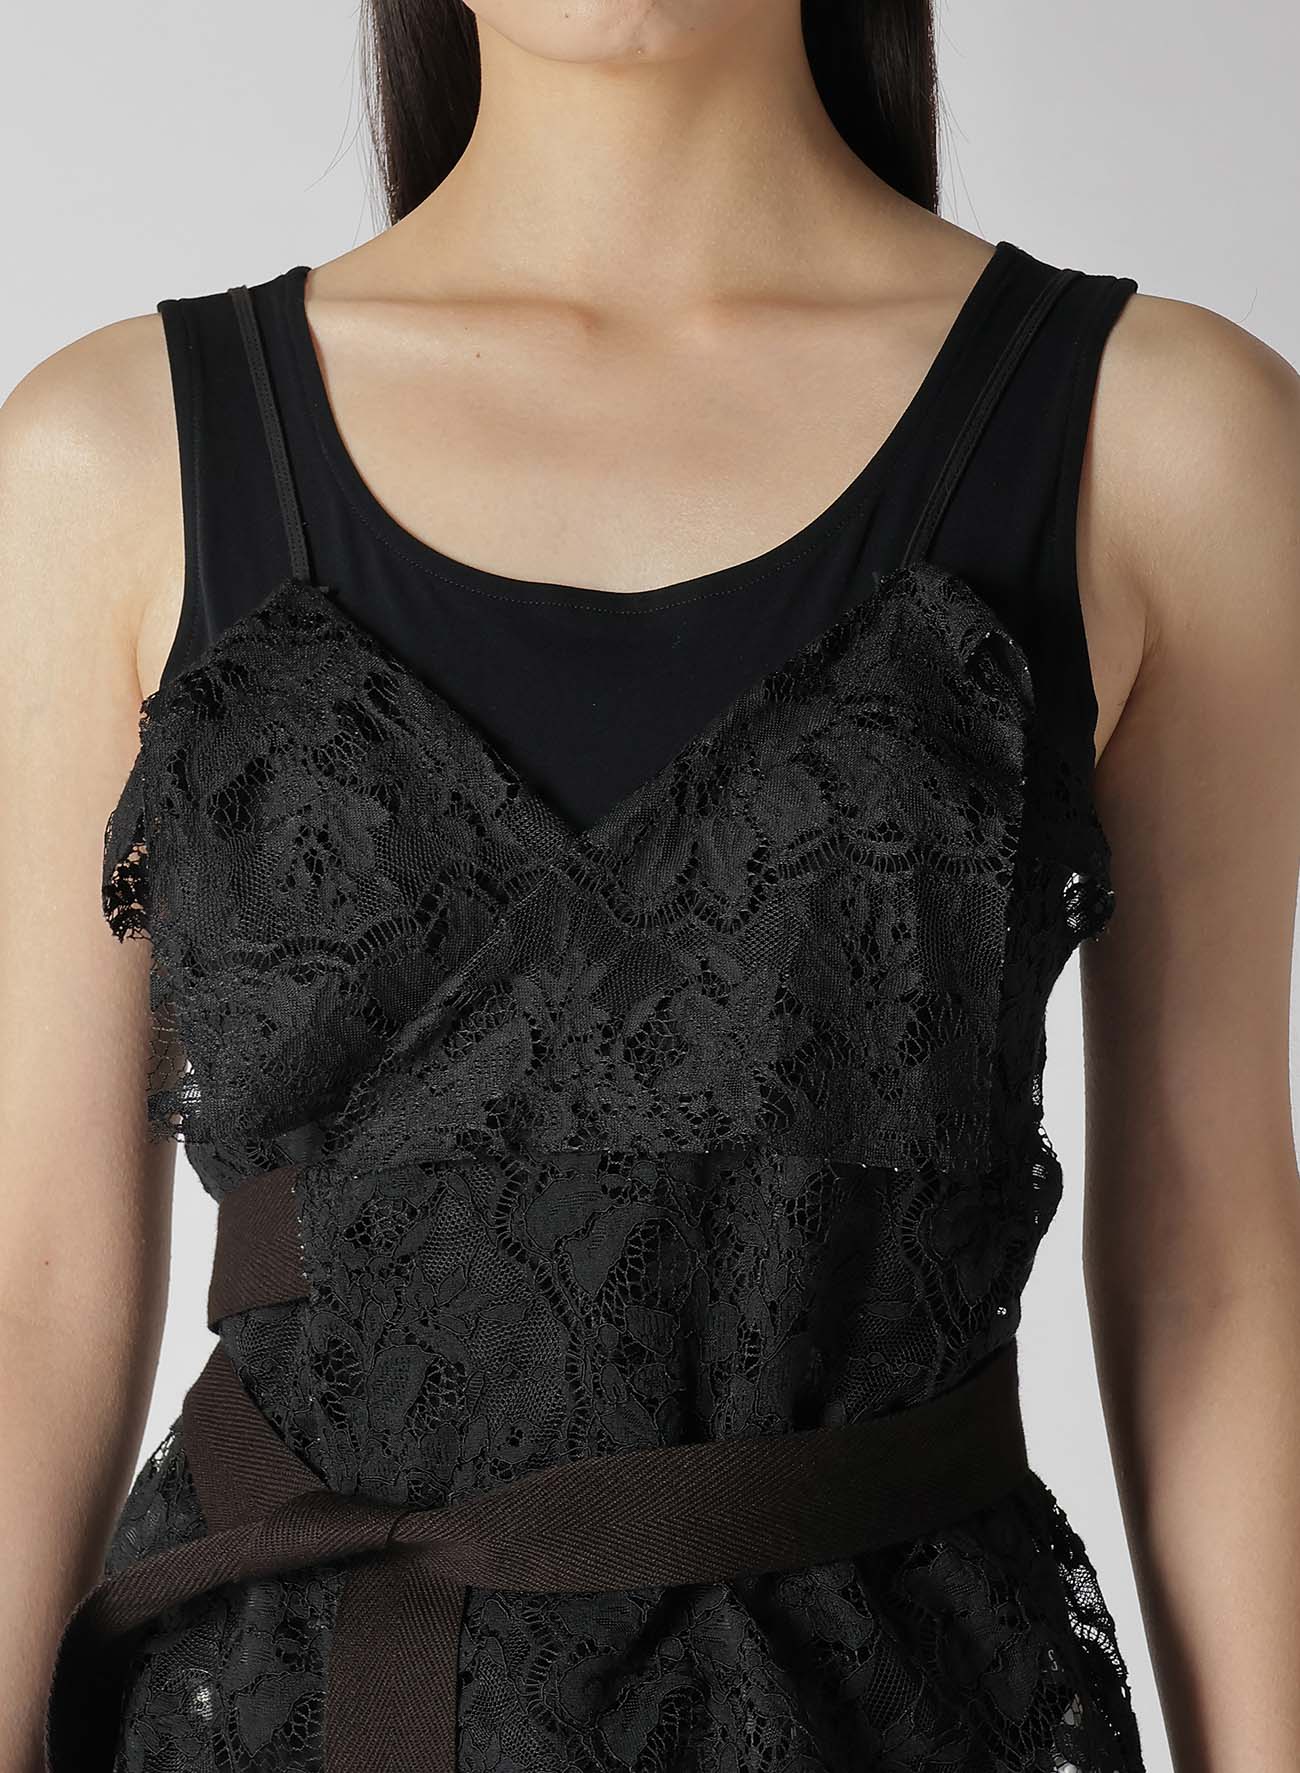 LACE CAMISOLE TOPS